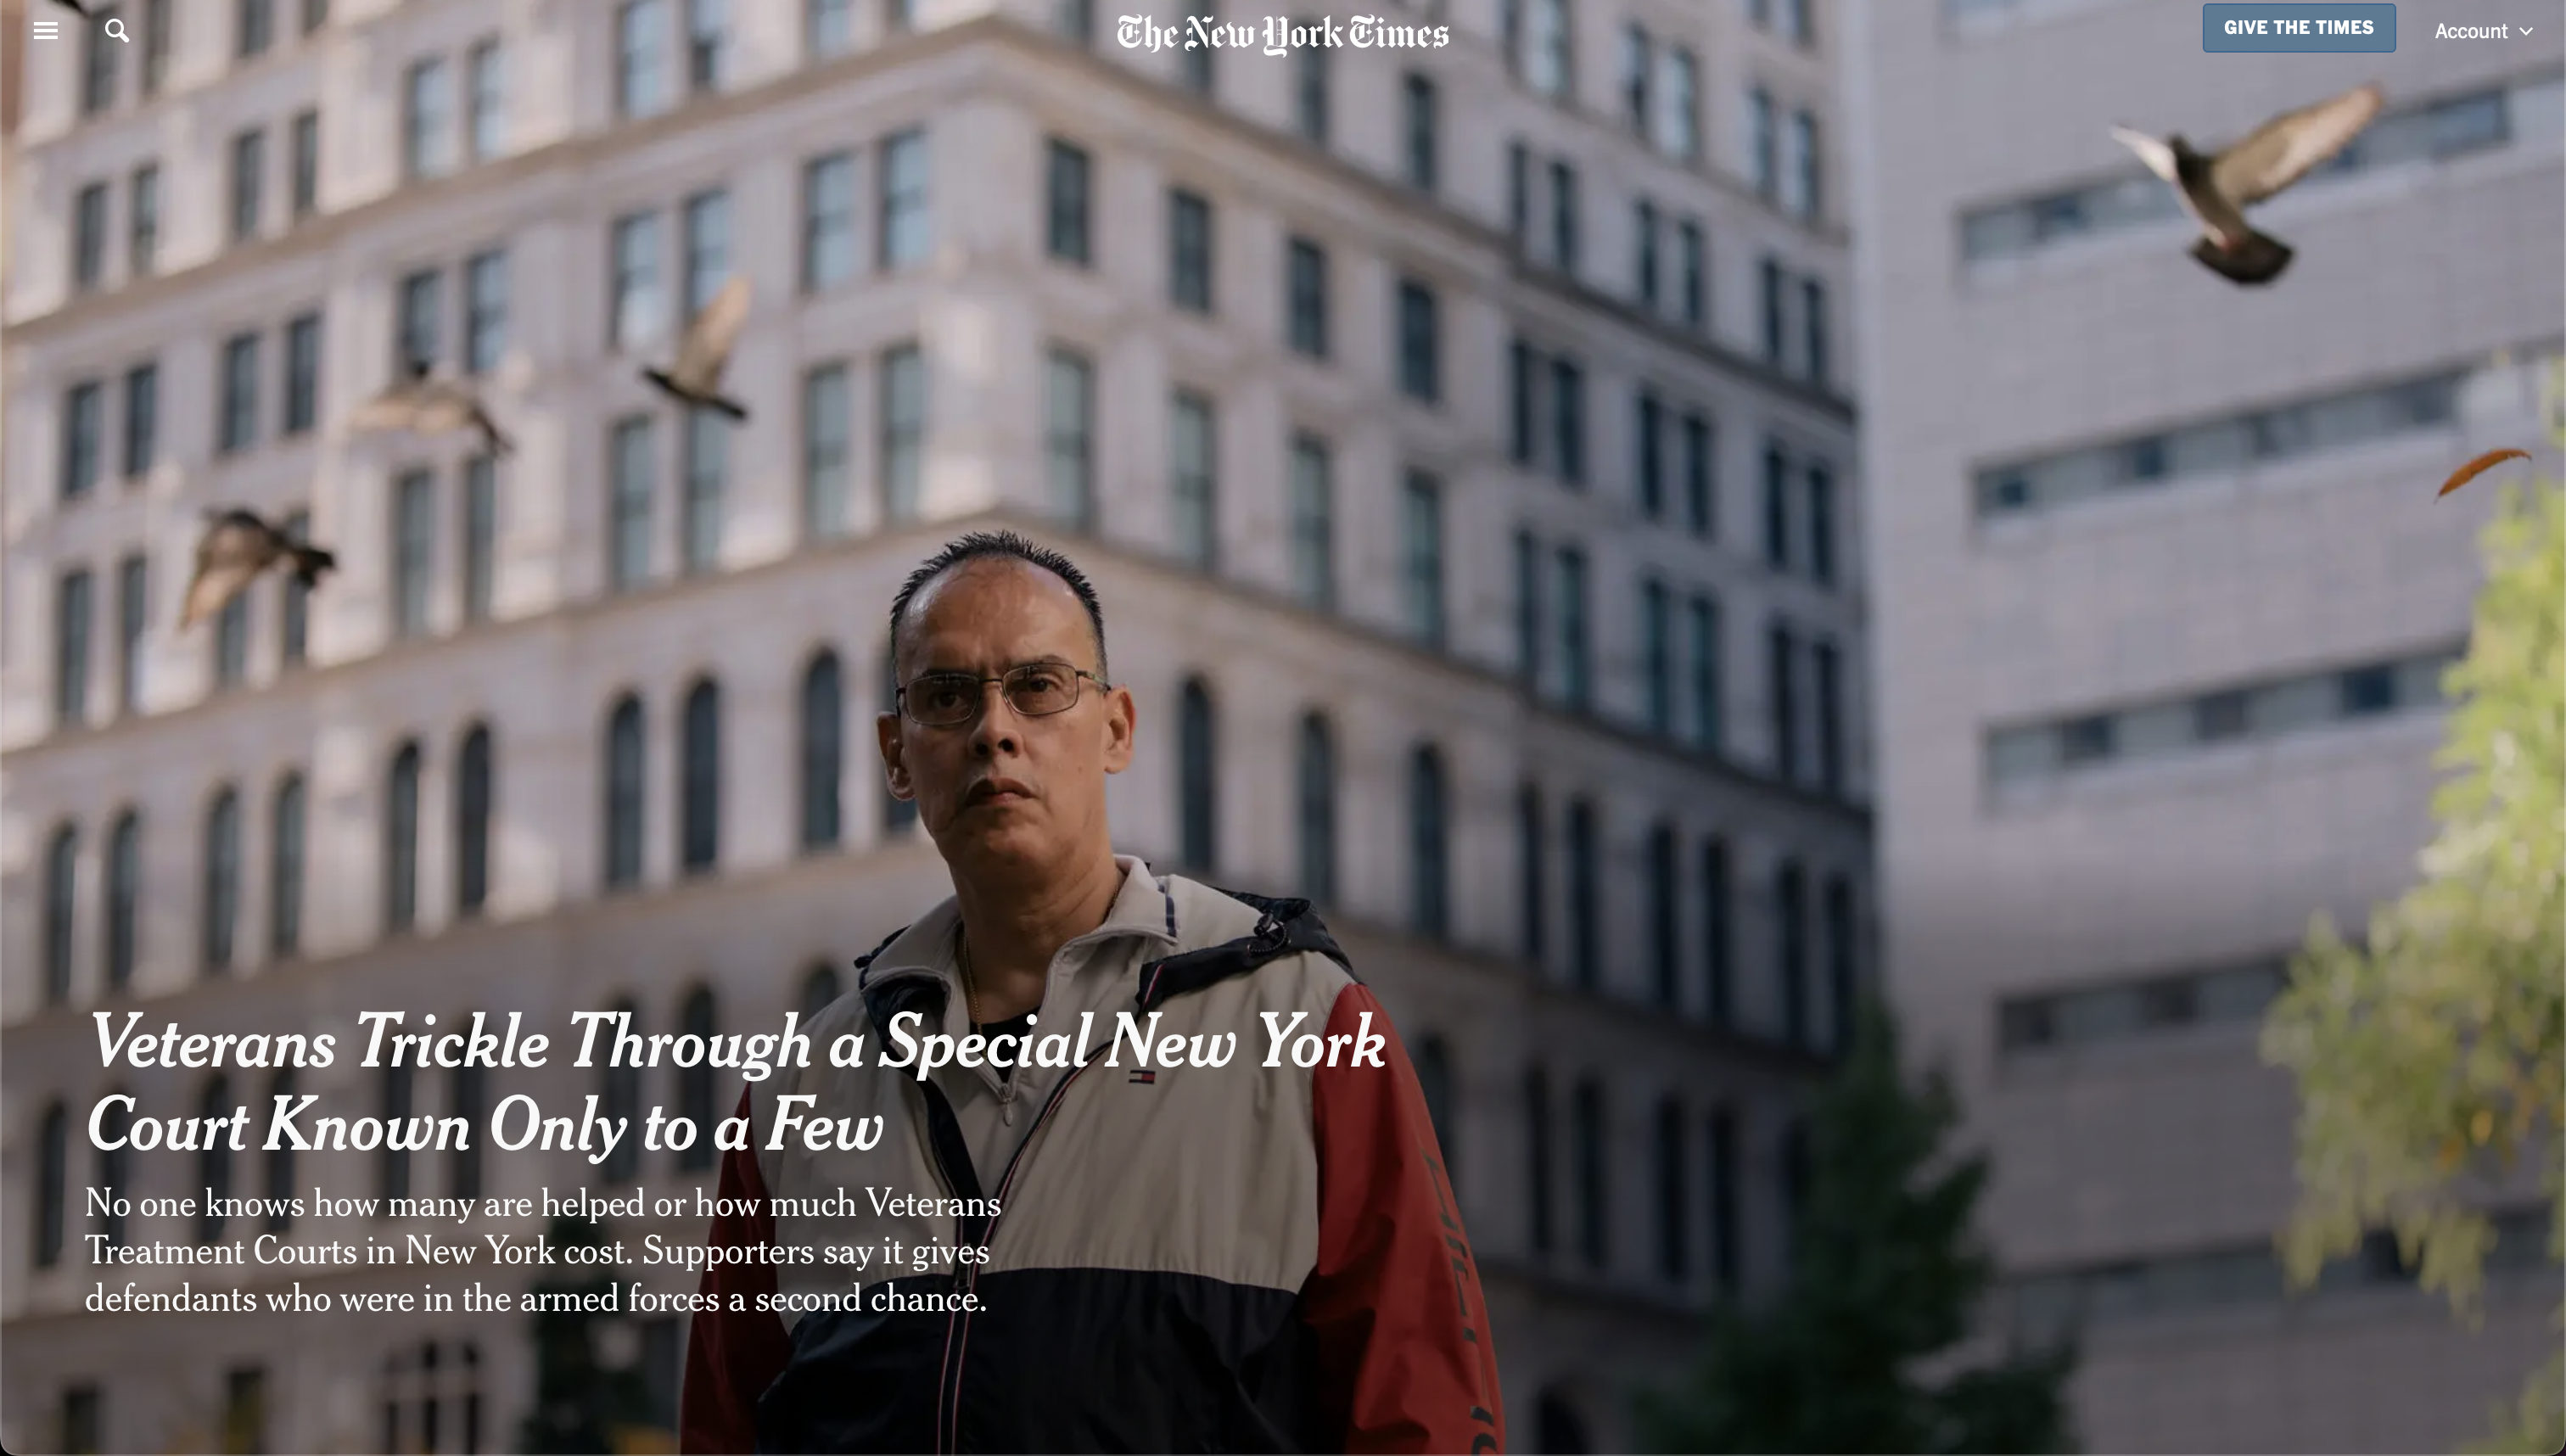 Thumbnail of for The New York Times: Veterans Trickle Through a Special New York Court Known Only to a Few